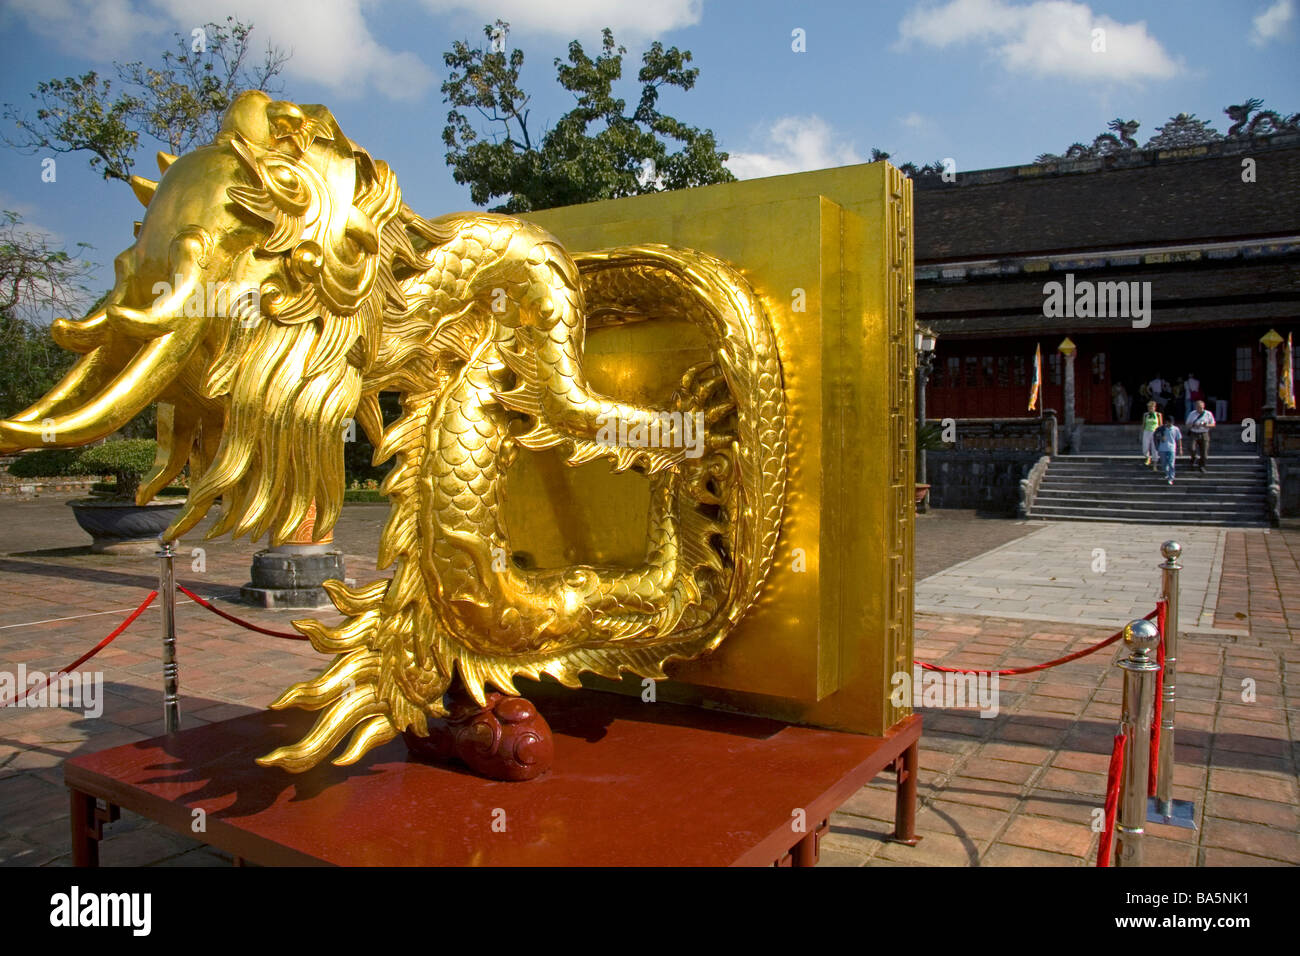 Gold leaf dragon sculpture on display at the Imperial Citadel of Hue Vietnam Stock Photo